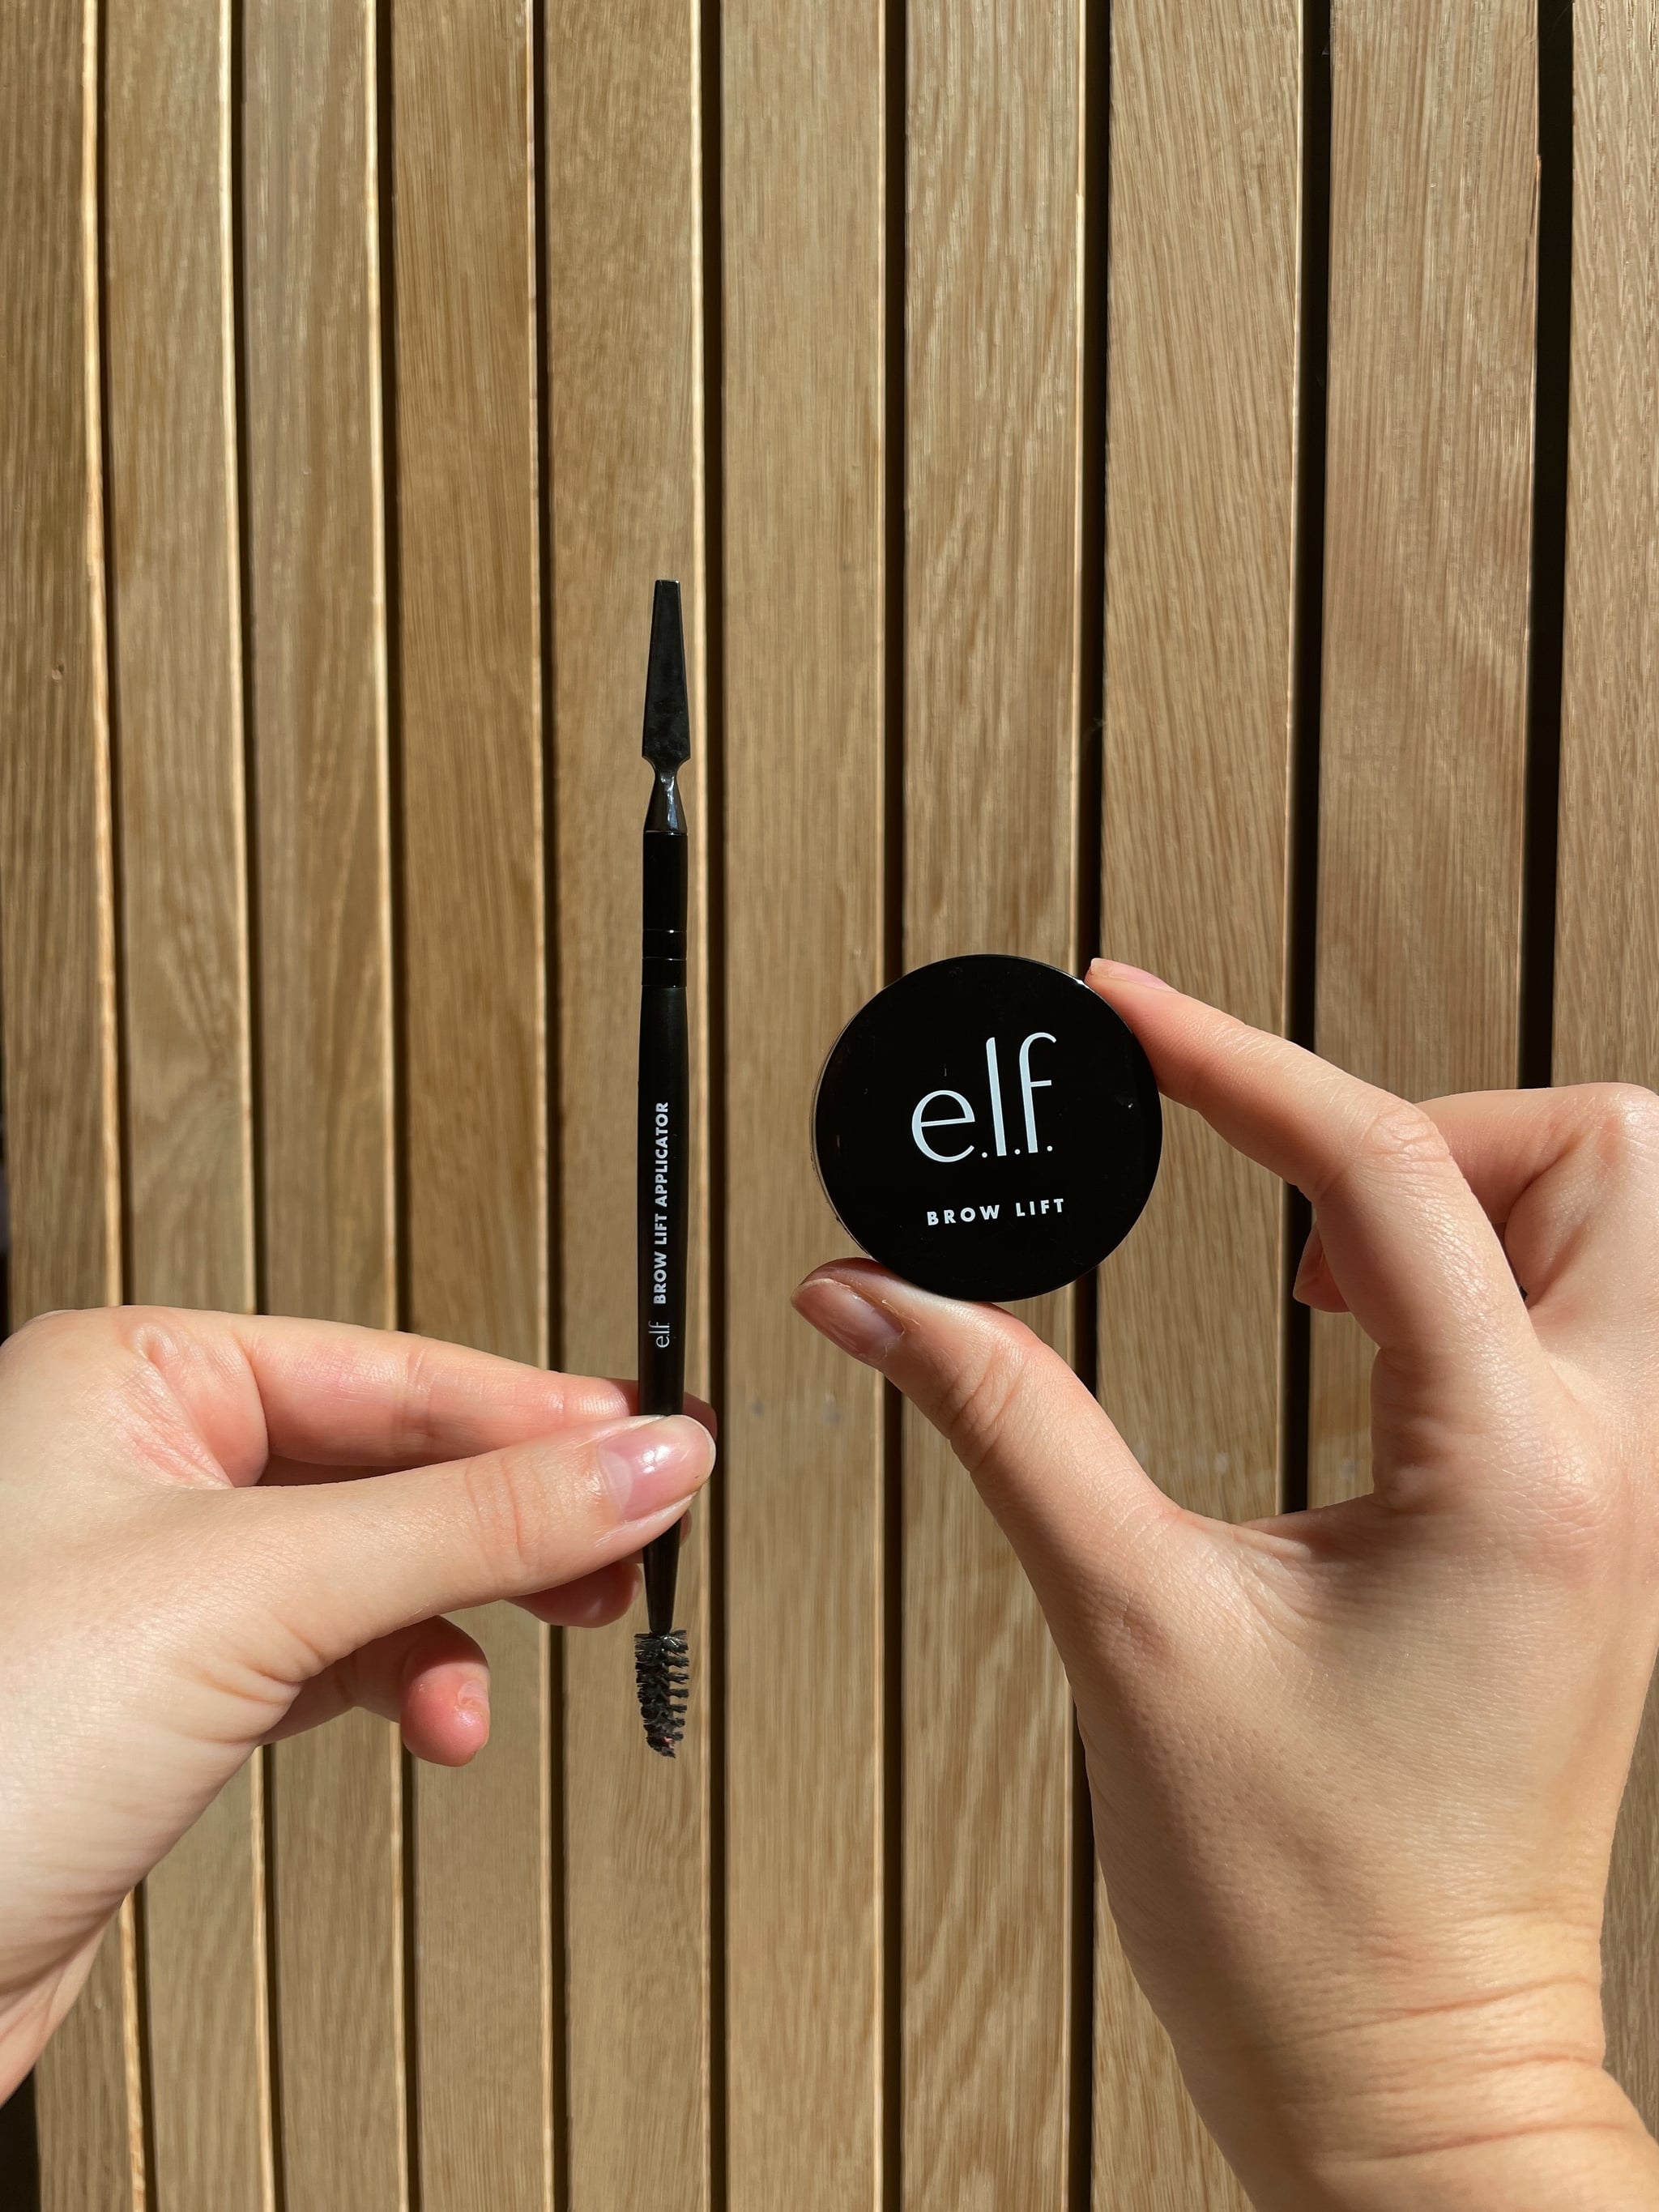 elf brow lift review